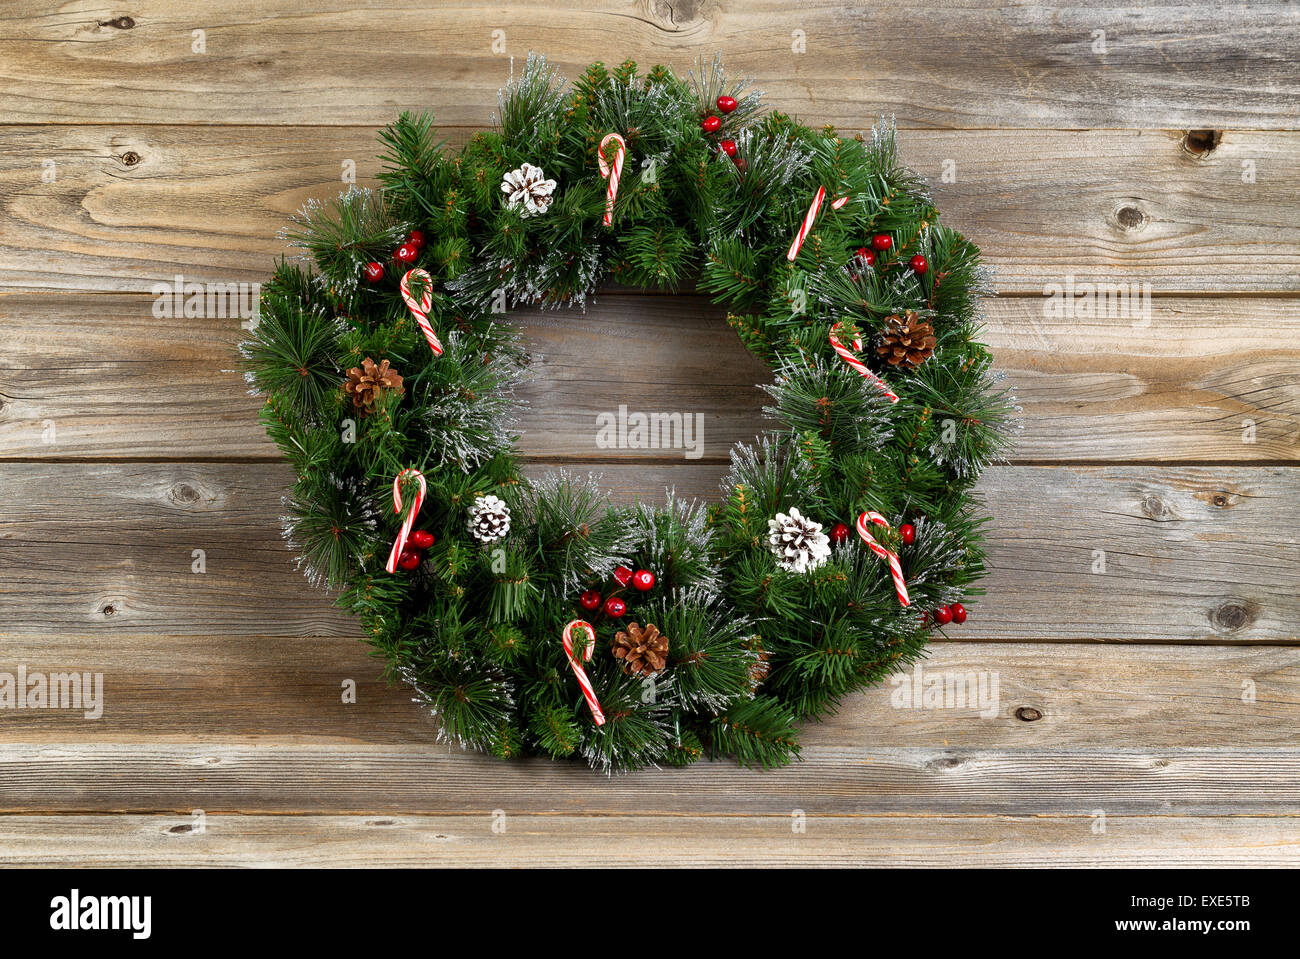 Christmas wreath decorated with pine cones, candy canes, and red berries on rustic wooden boards. Stock Photo